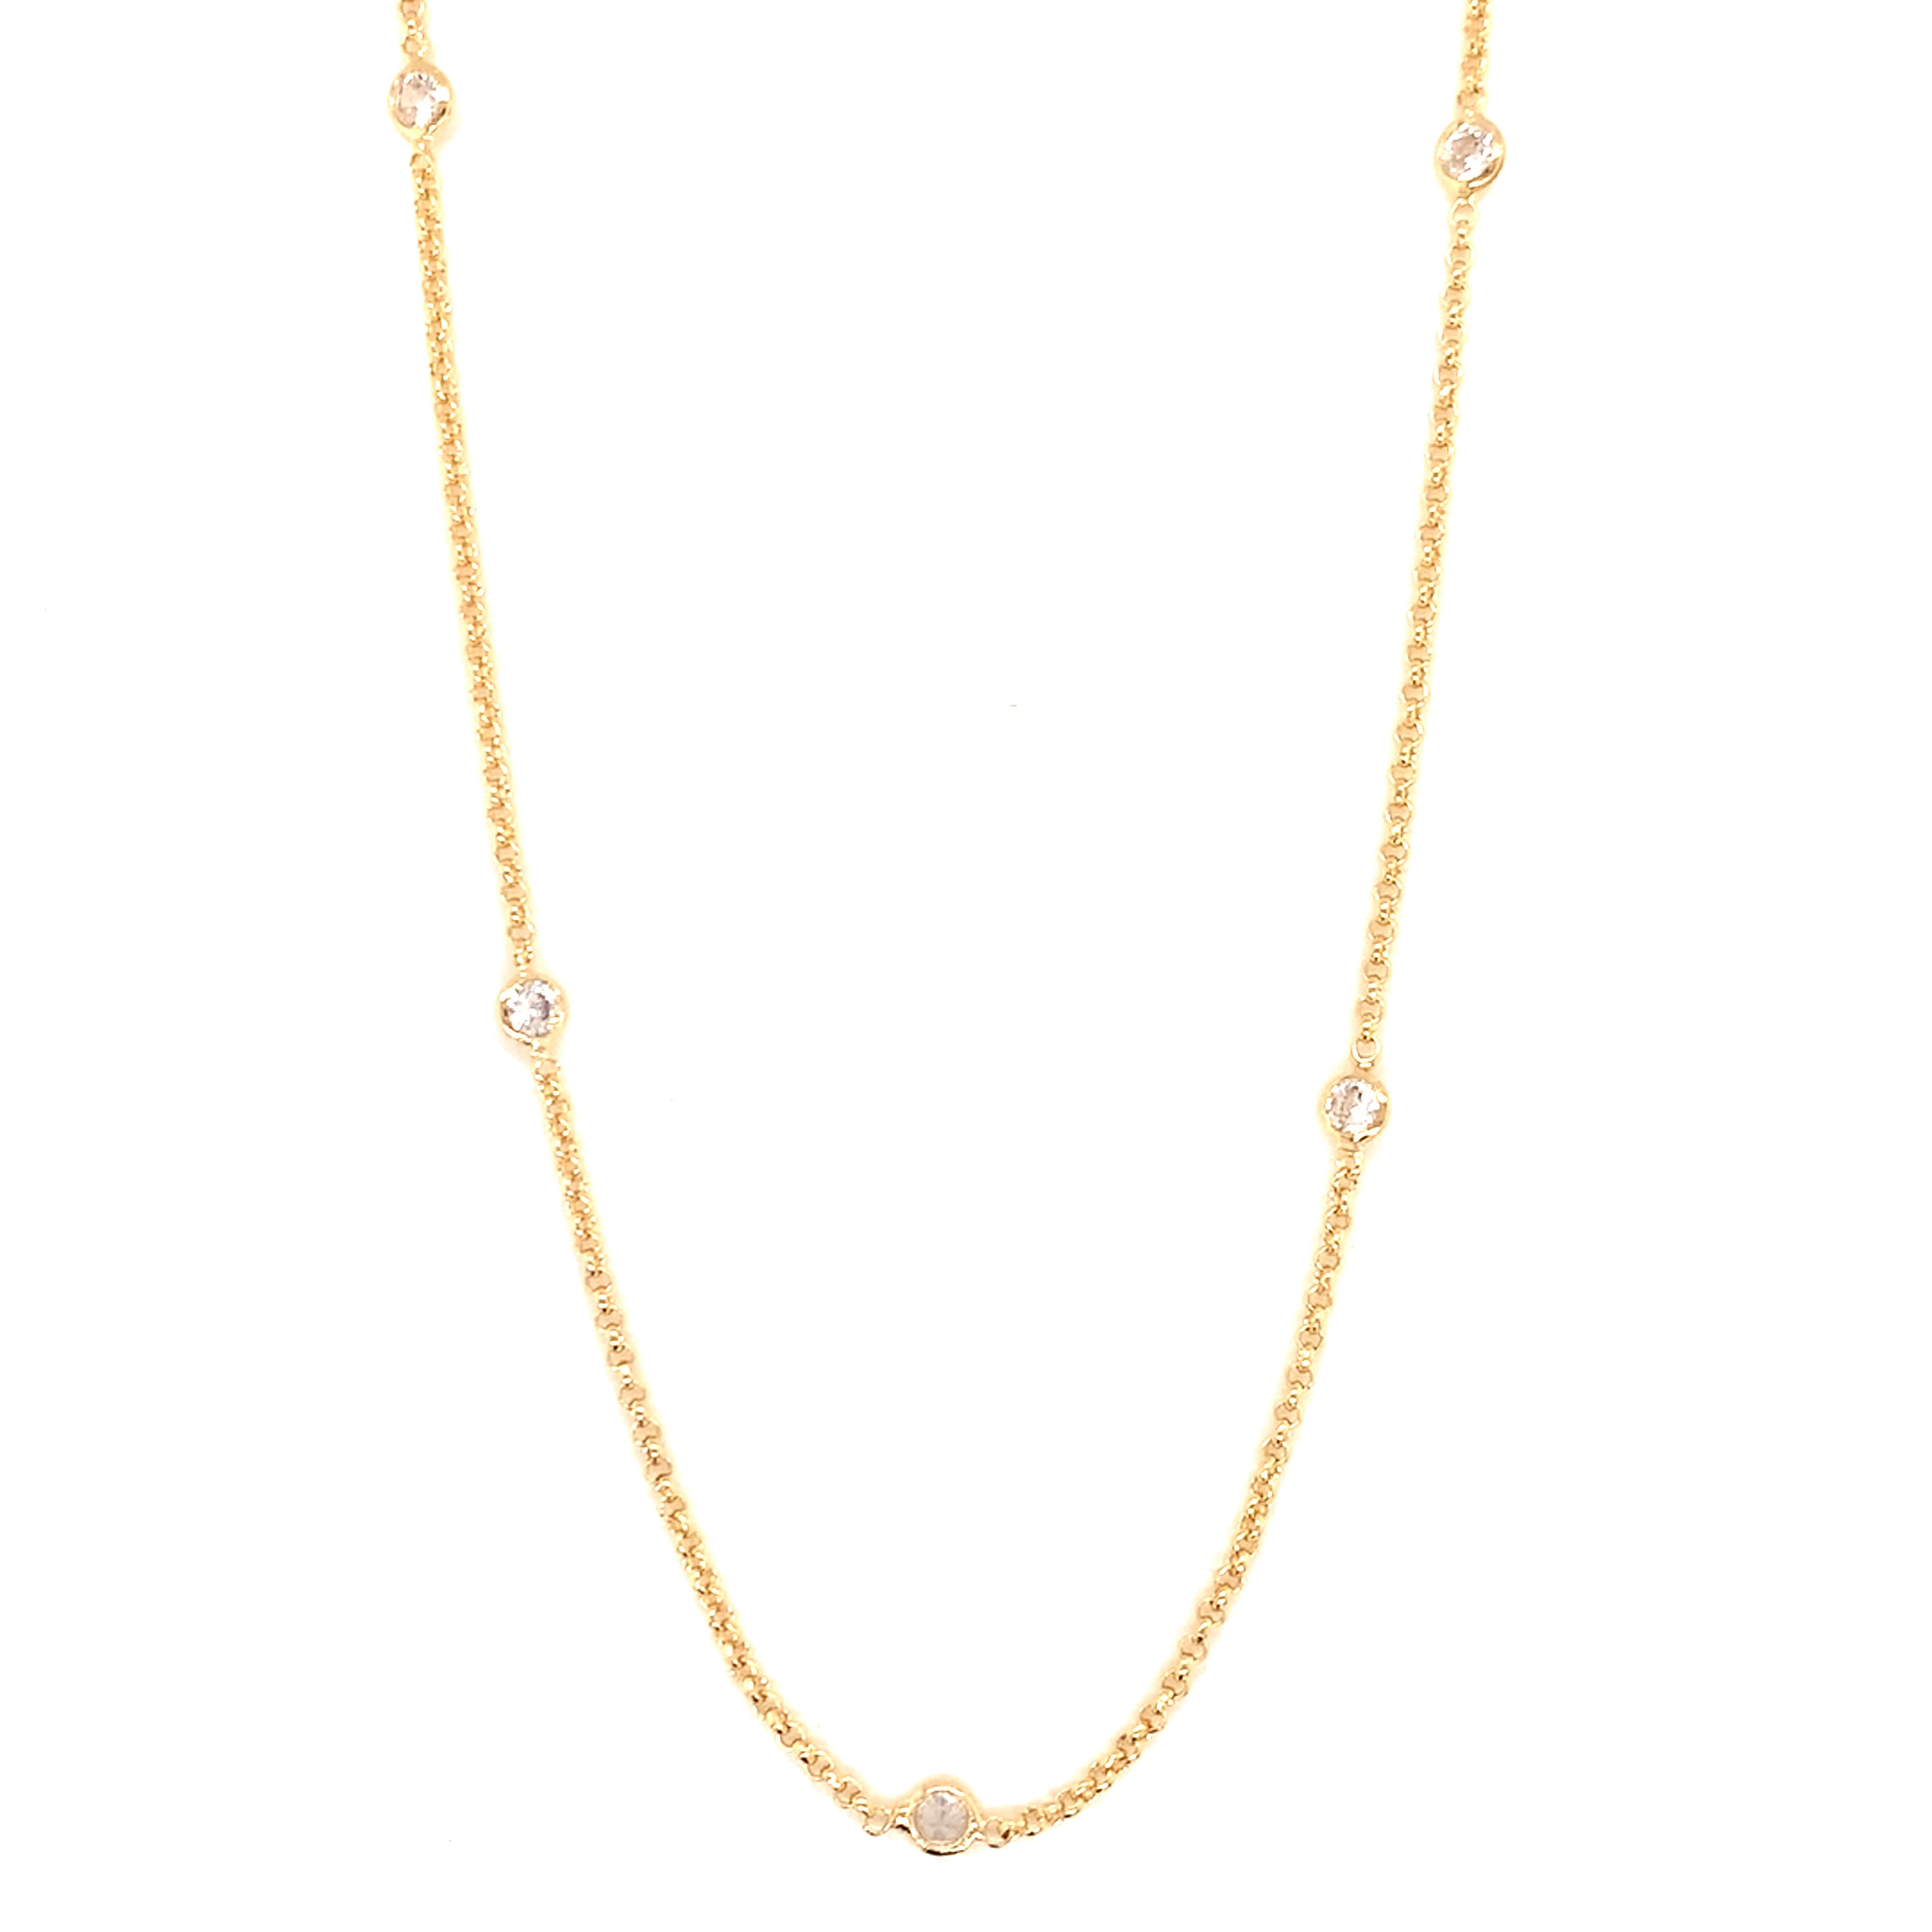 16" CZ Station Necklace + 2" Extension - Gold Filled